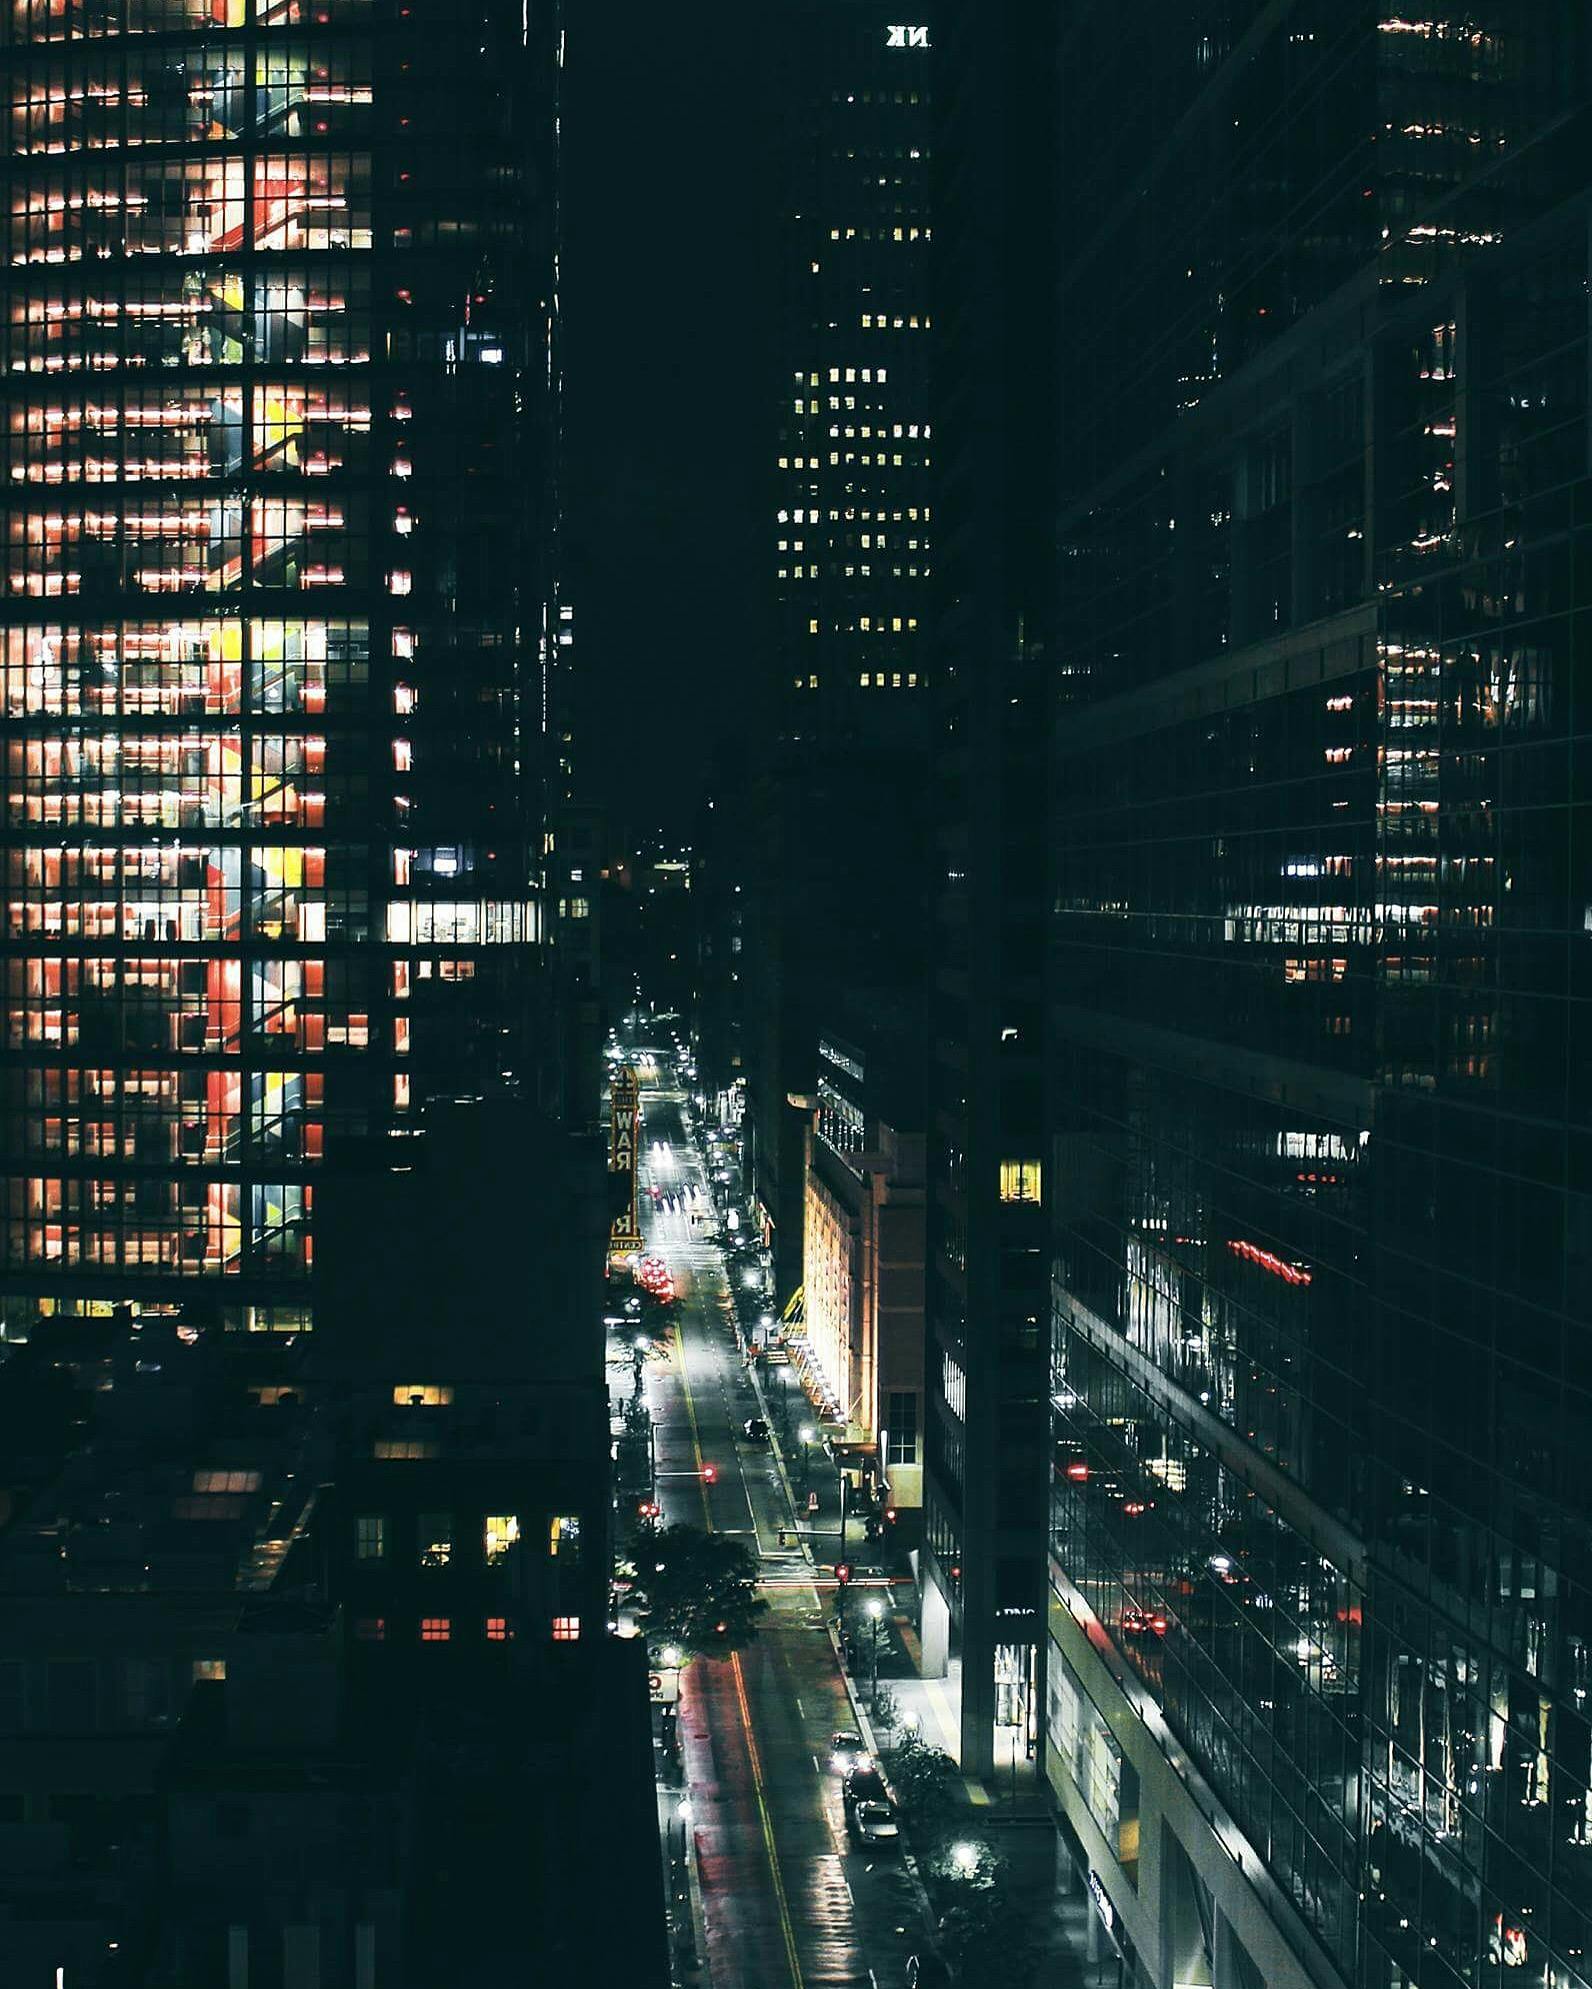 Vehicles at the City during Night · Free Stock Photo